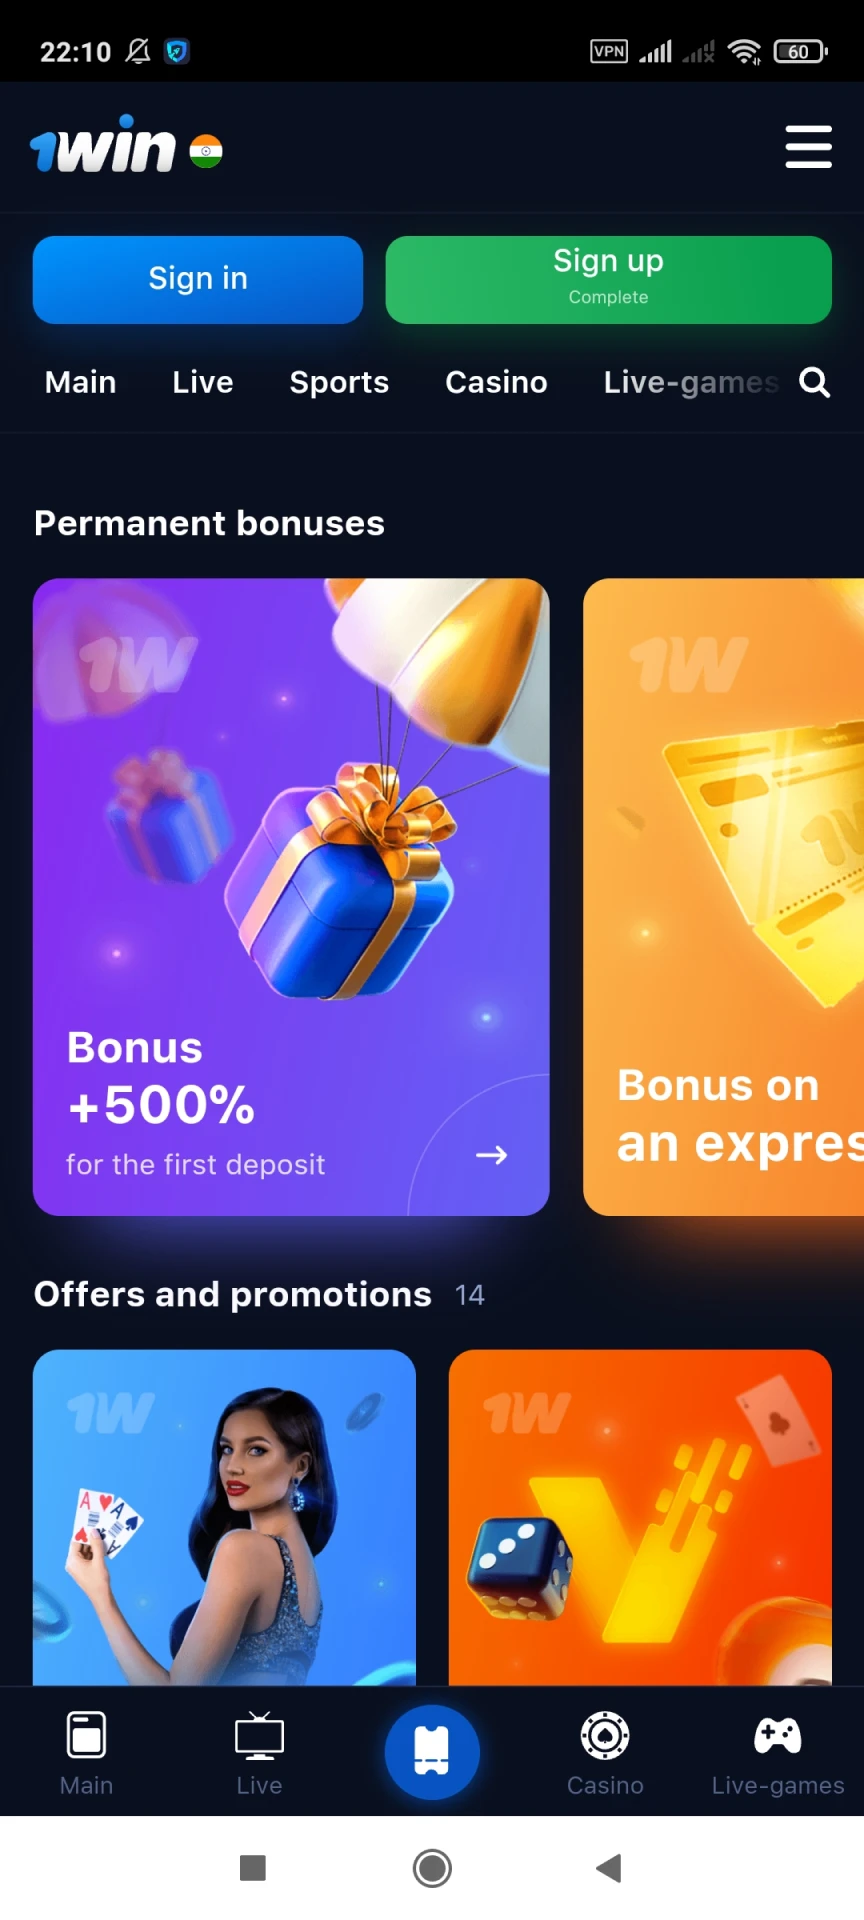 Bonus and special offers section in the 1win app.